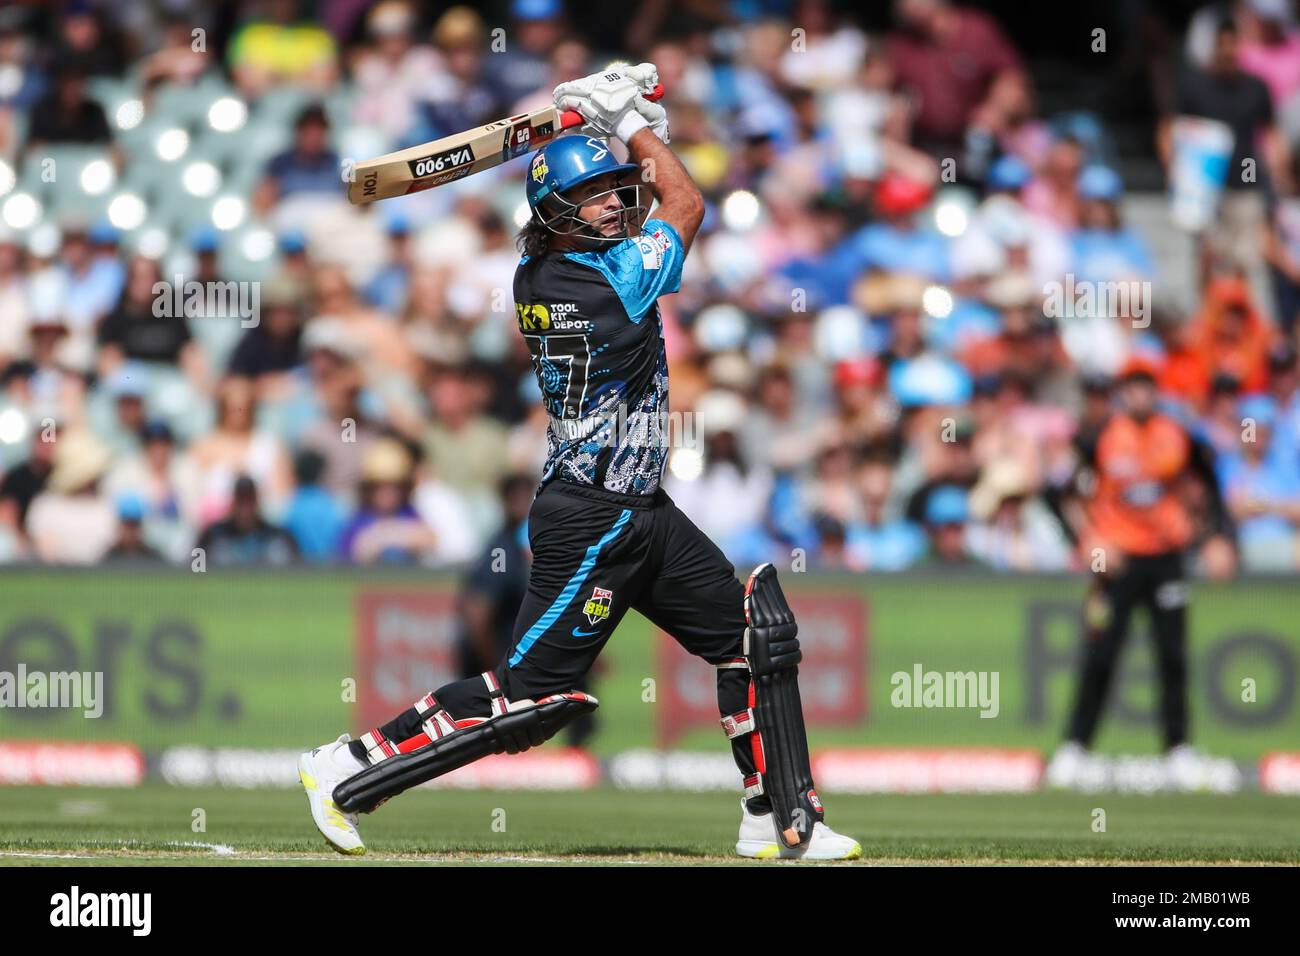 Colin De Grandhomme of the Strikers during the Big Bash League (BBL) cricket match between the Adelaide Strikers and the Perth Scorchers at Adelaide Oval in Adelaide, Friday, January 20, 2023